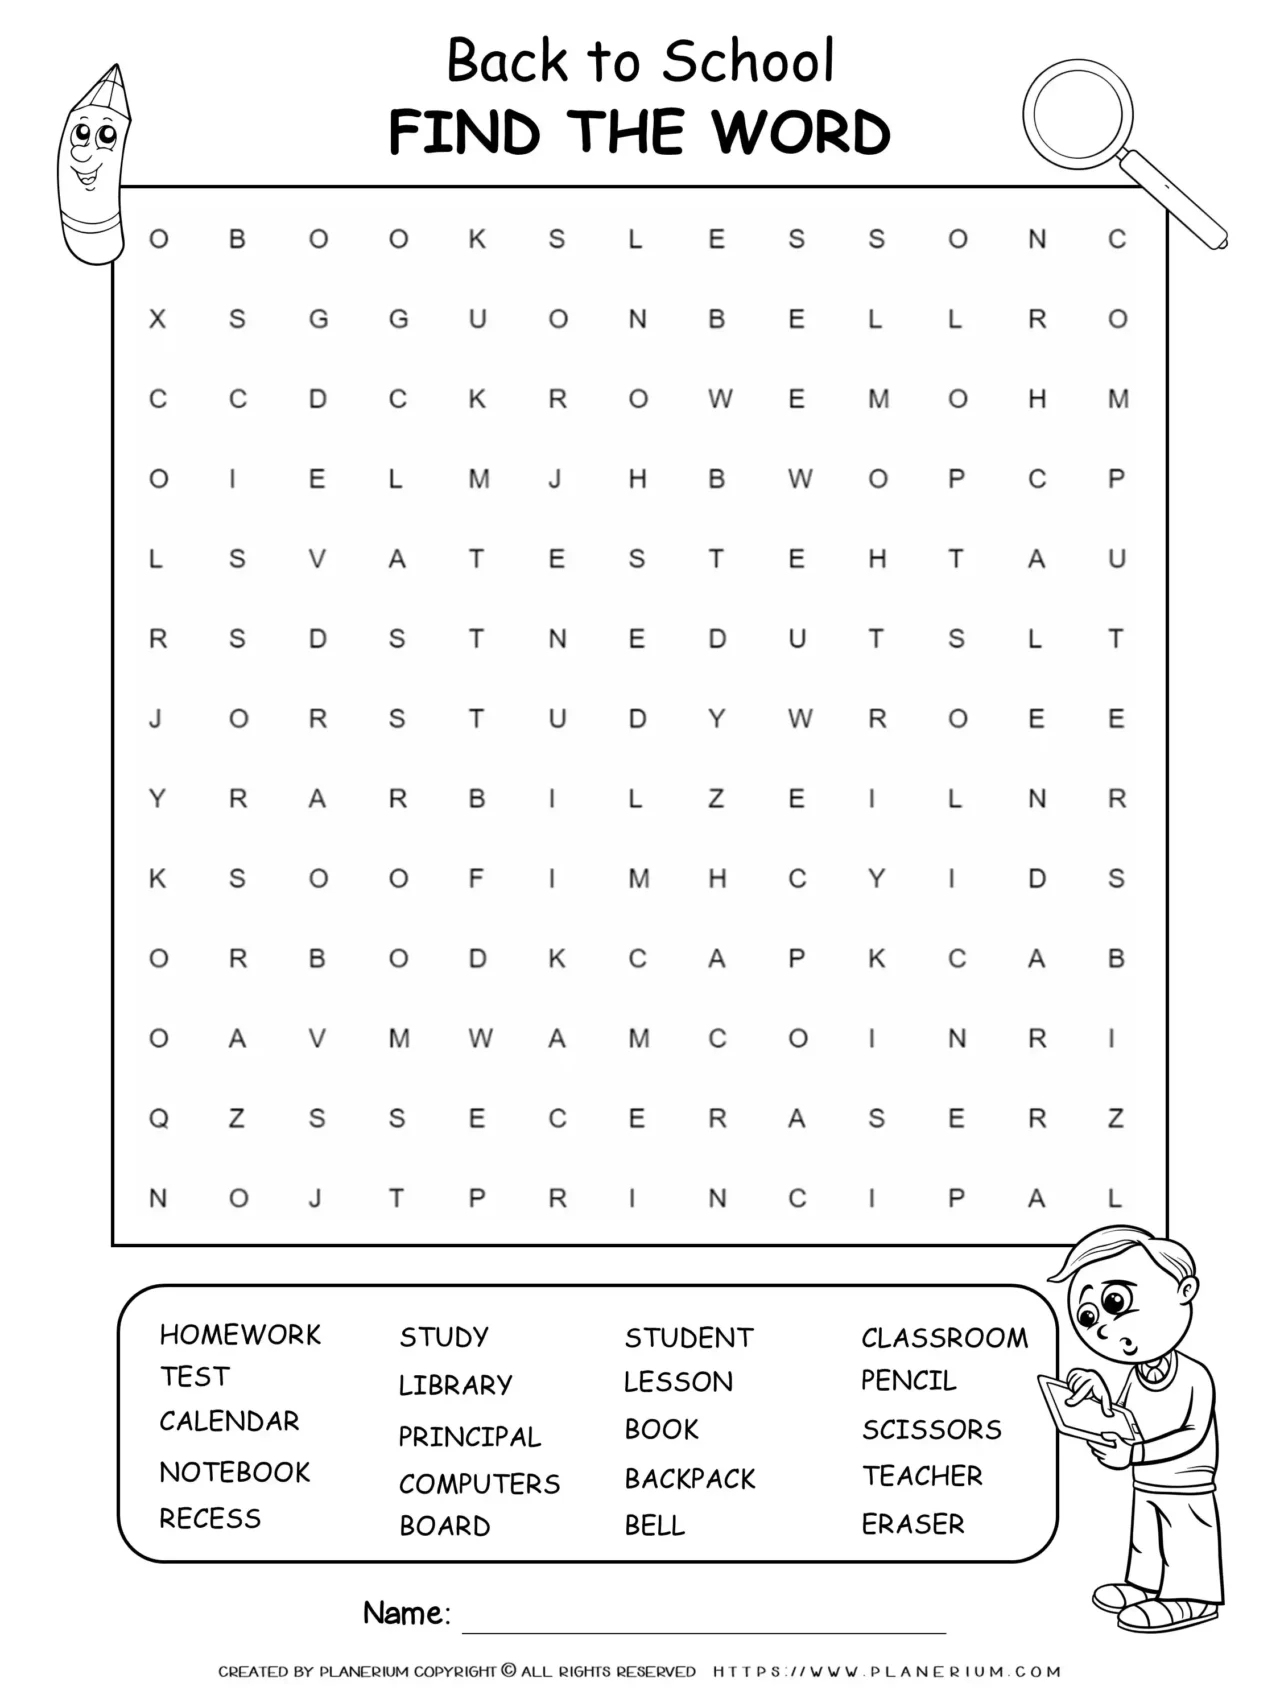 Back to School - Worksheet - Find the word